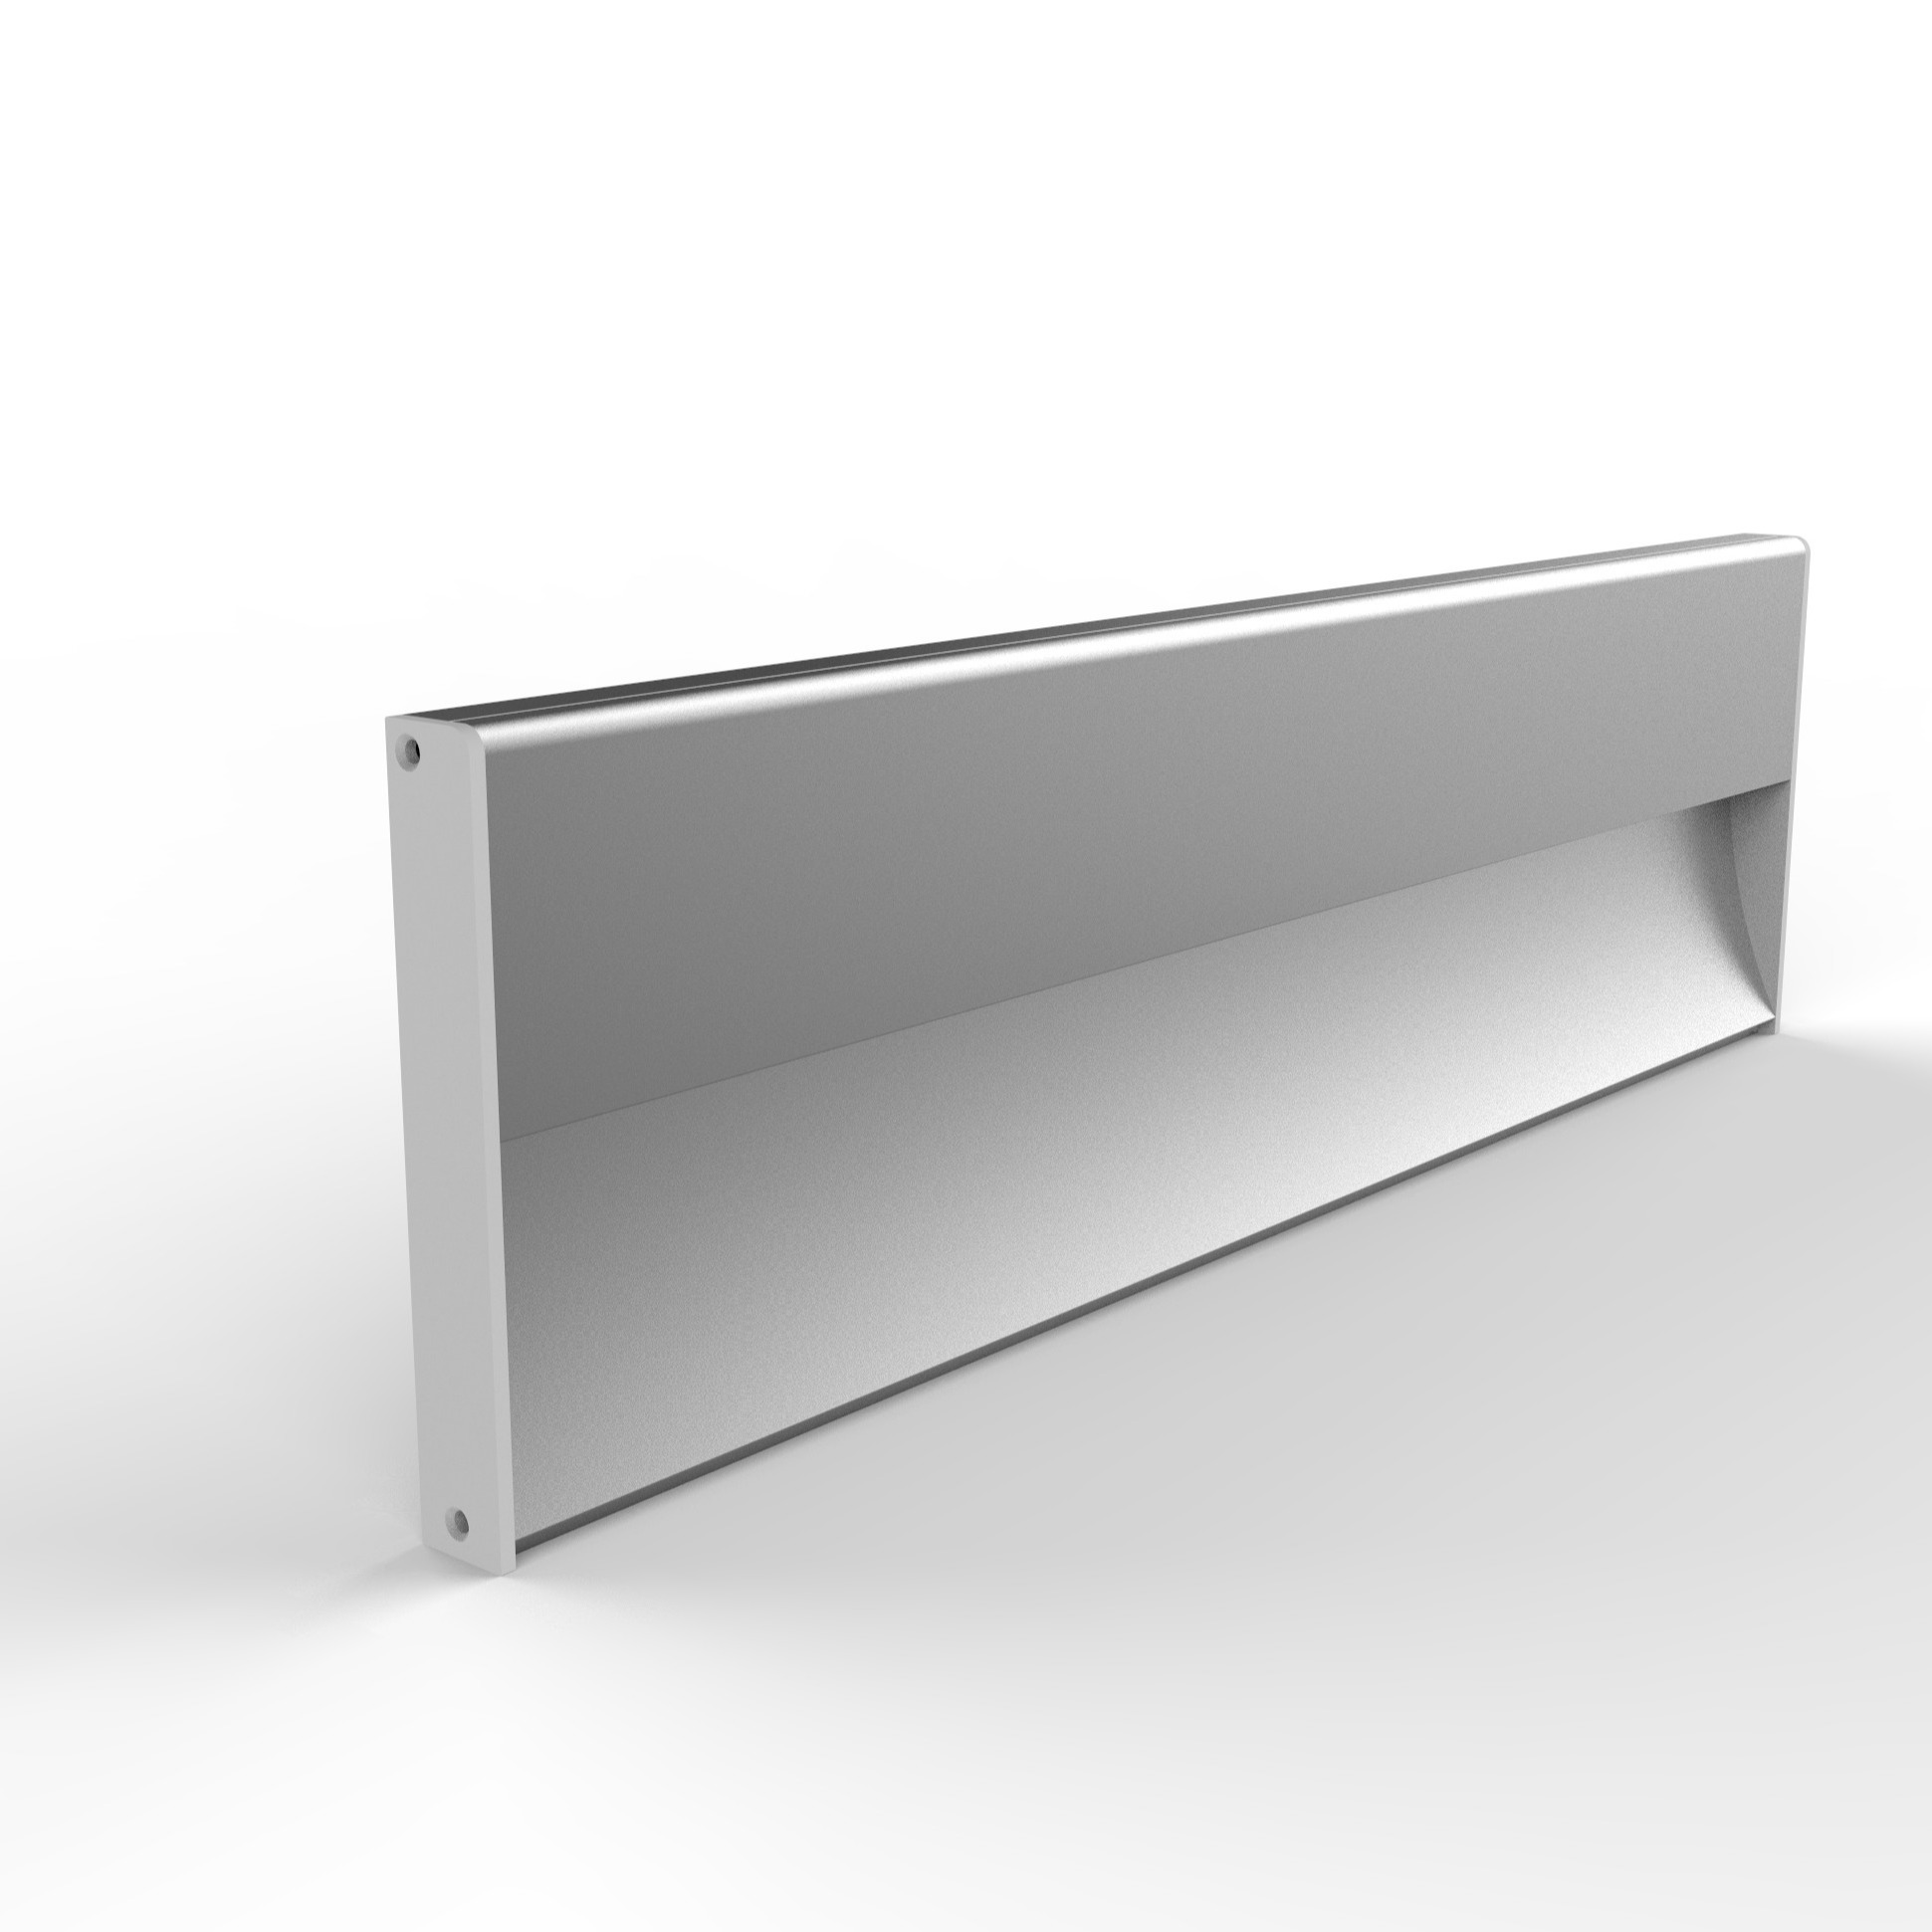 Wholesale YD-9013 Aluminum LED Floor Channel 6063 T5 Anodized For Skirting Board Lighting from china suppliers